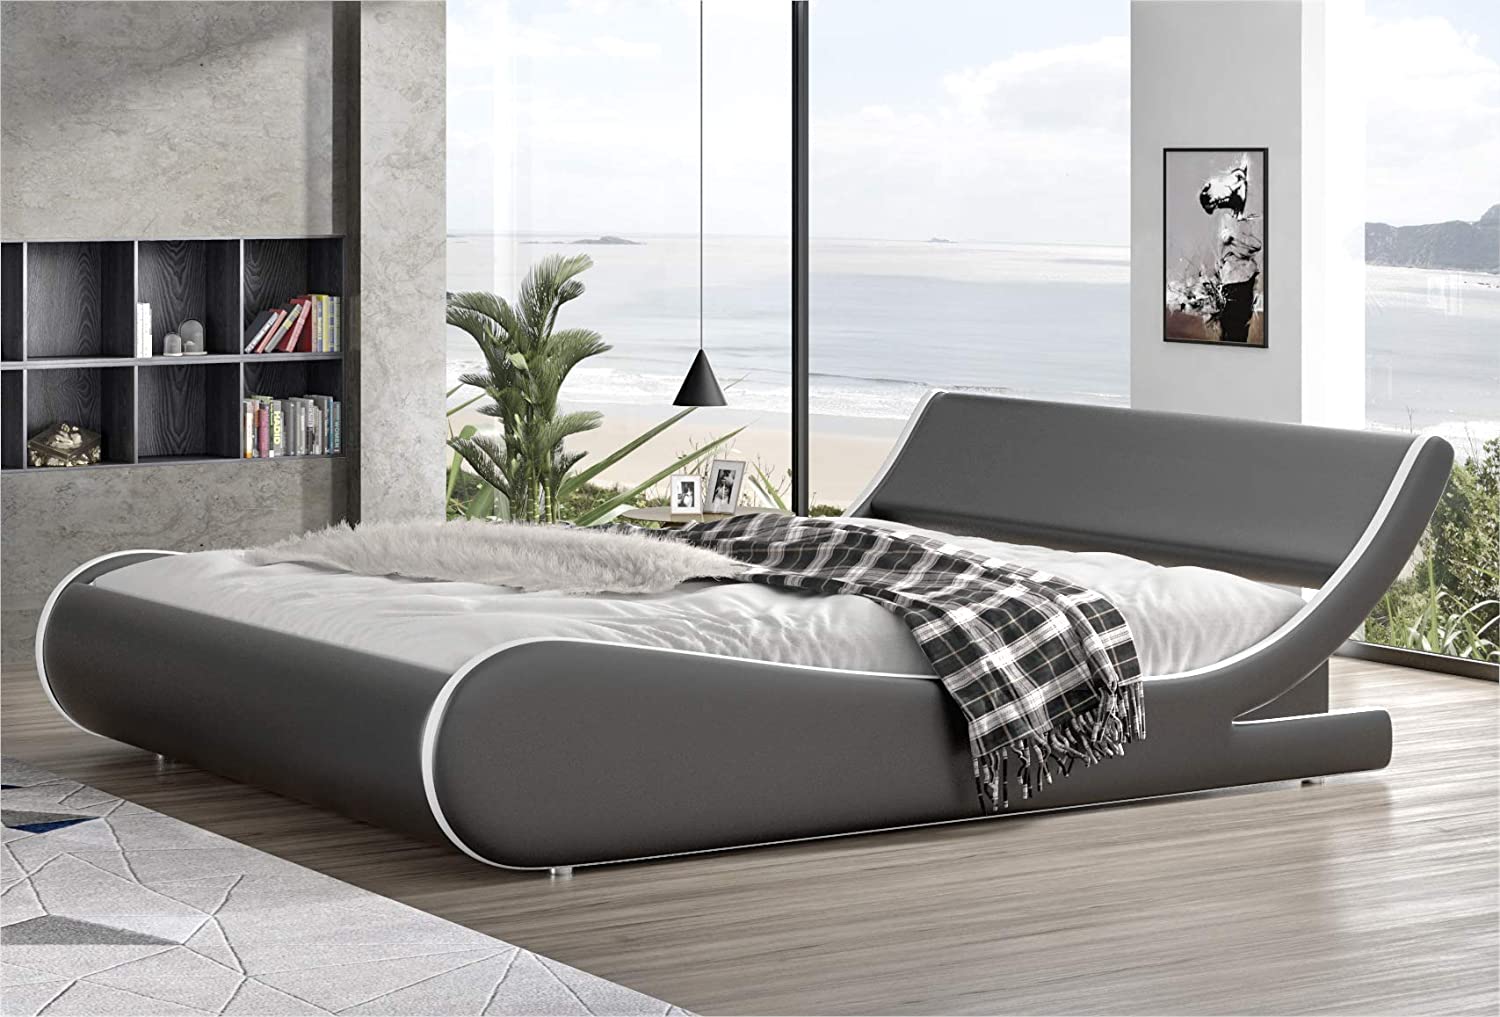 Sha Cerlin King Size Platform Bed, Faux Leather Low Profile Sleigh Bed Frame With Adjustable Headboard